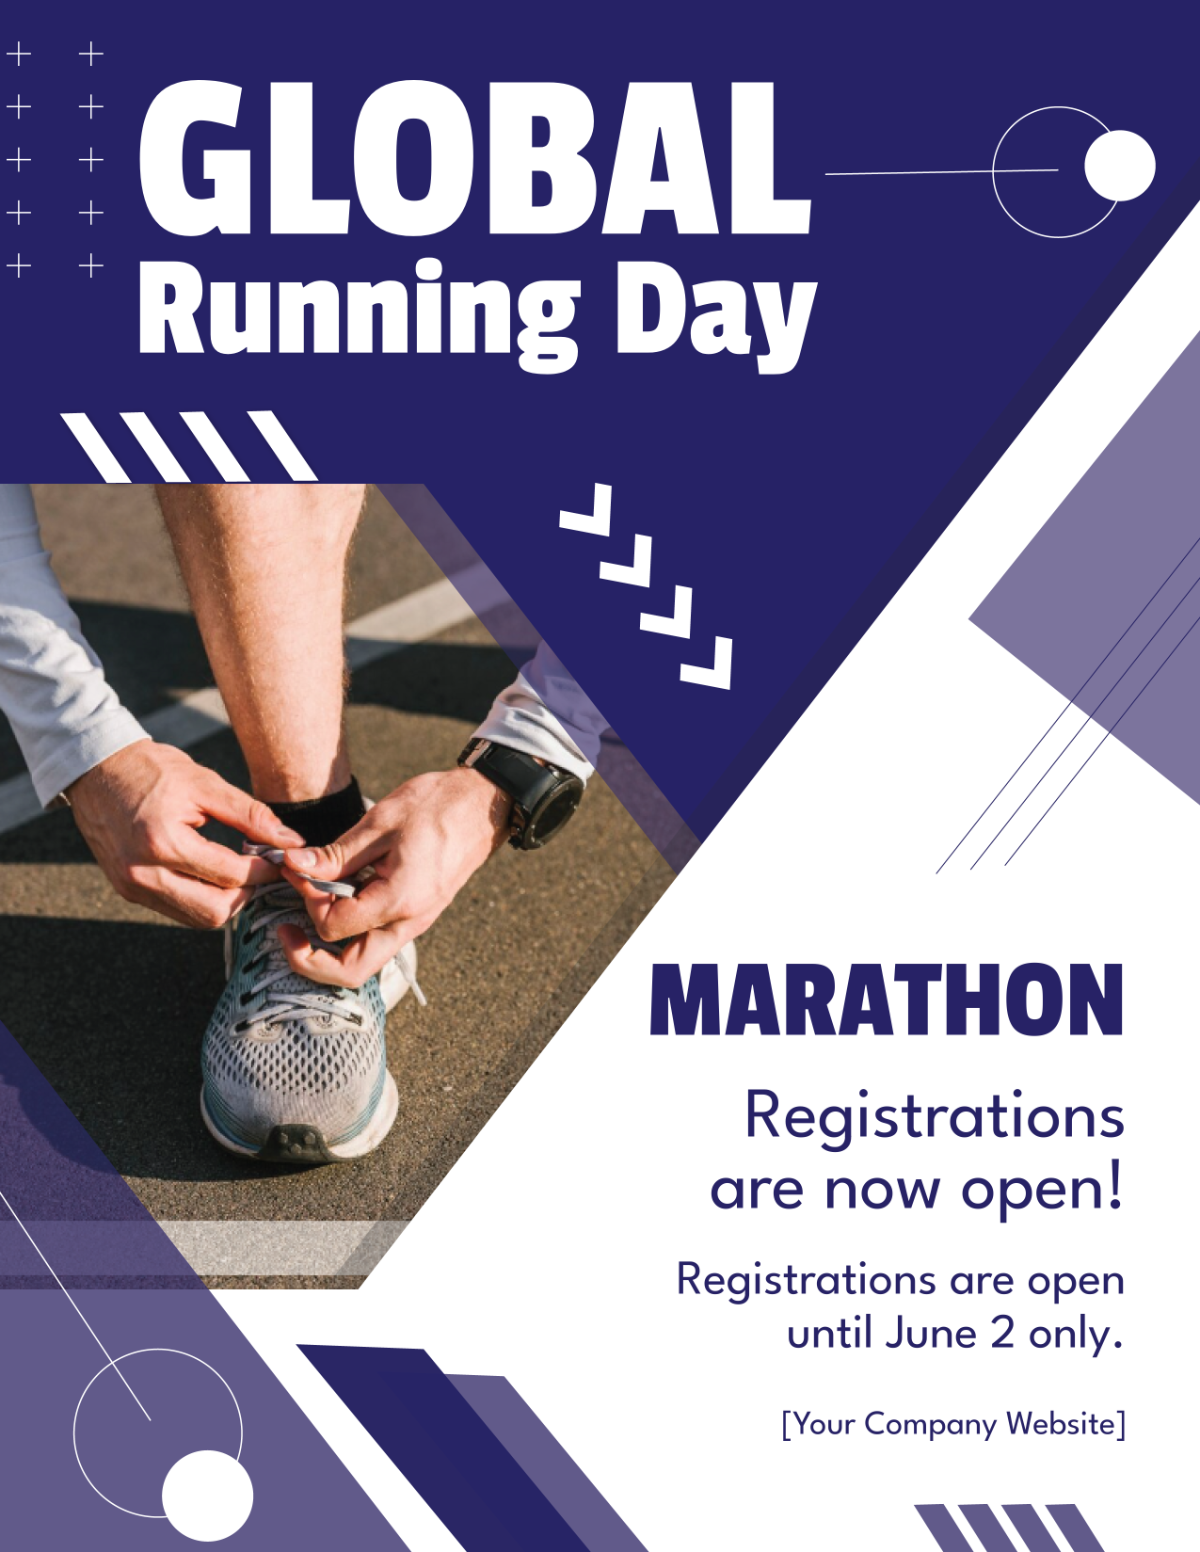 Global Running Day Flyer Template